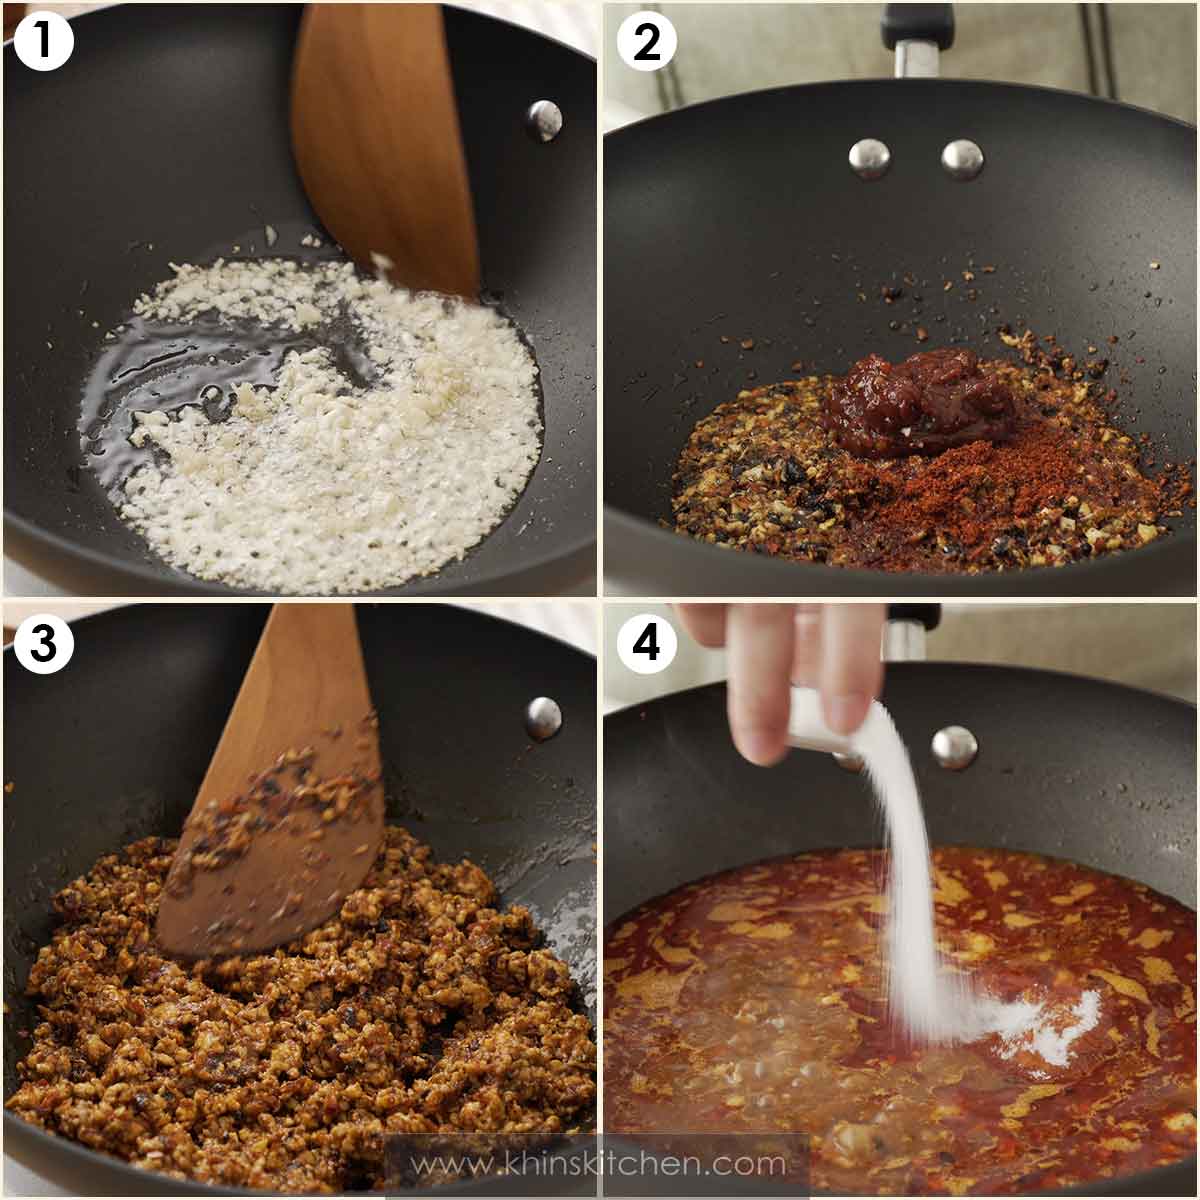 4 image collage showing how to stir fry minced meat and sauce.